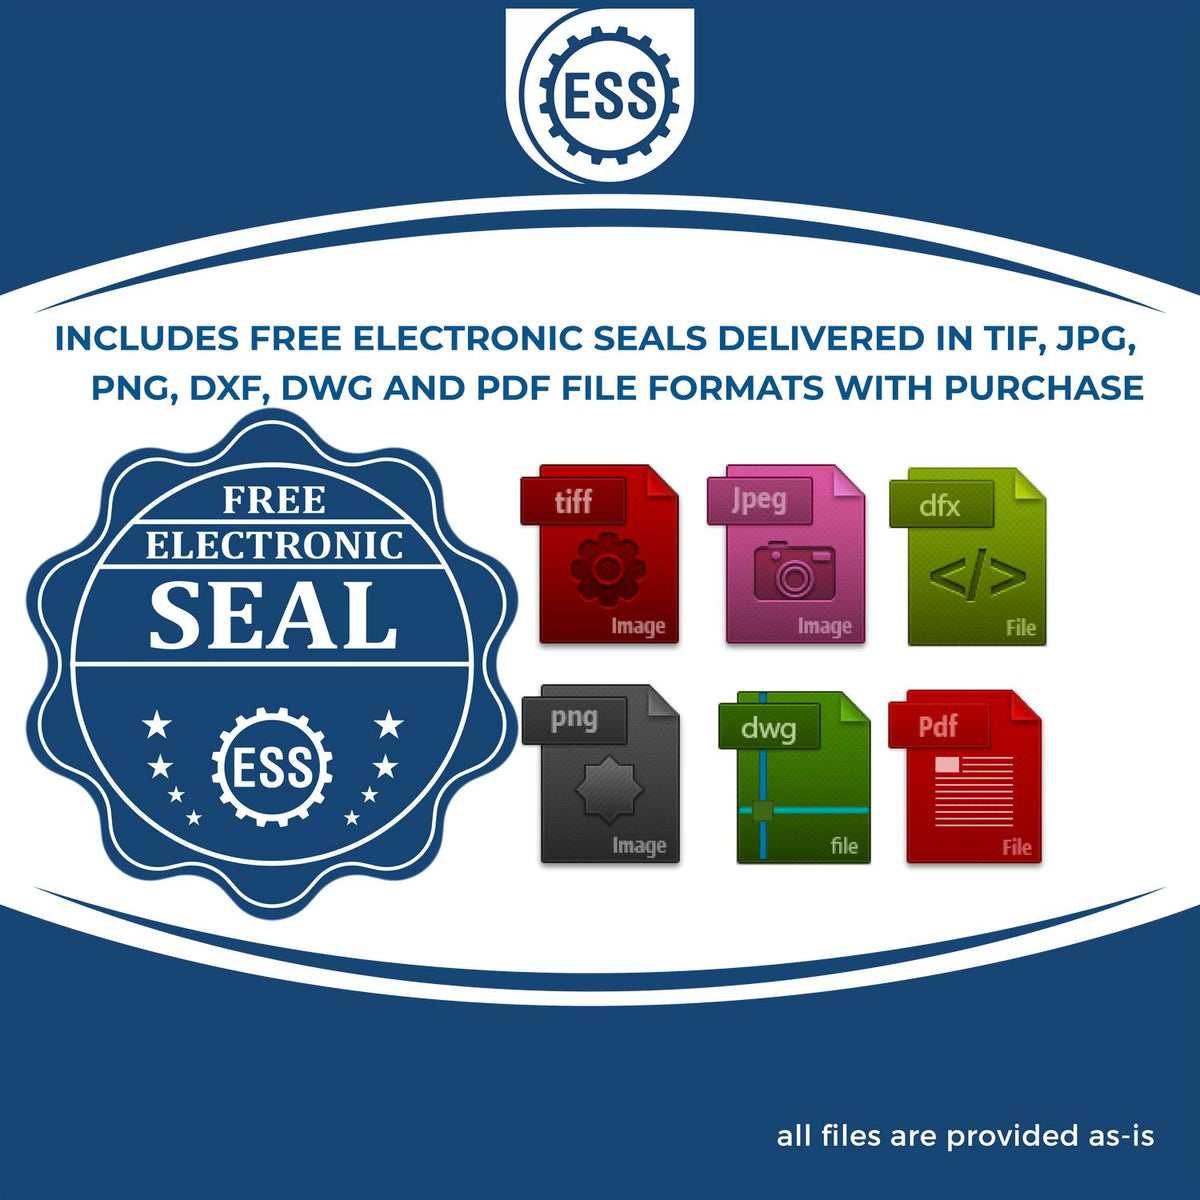 An infographic for the free electronic seal for the Gift New Hampshire Landscape Architect Seal illustrating the different file type icons such as DXF, DWG, TIF, JPG and PNG.